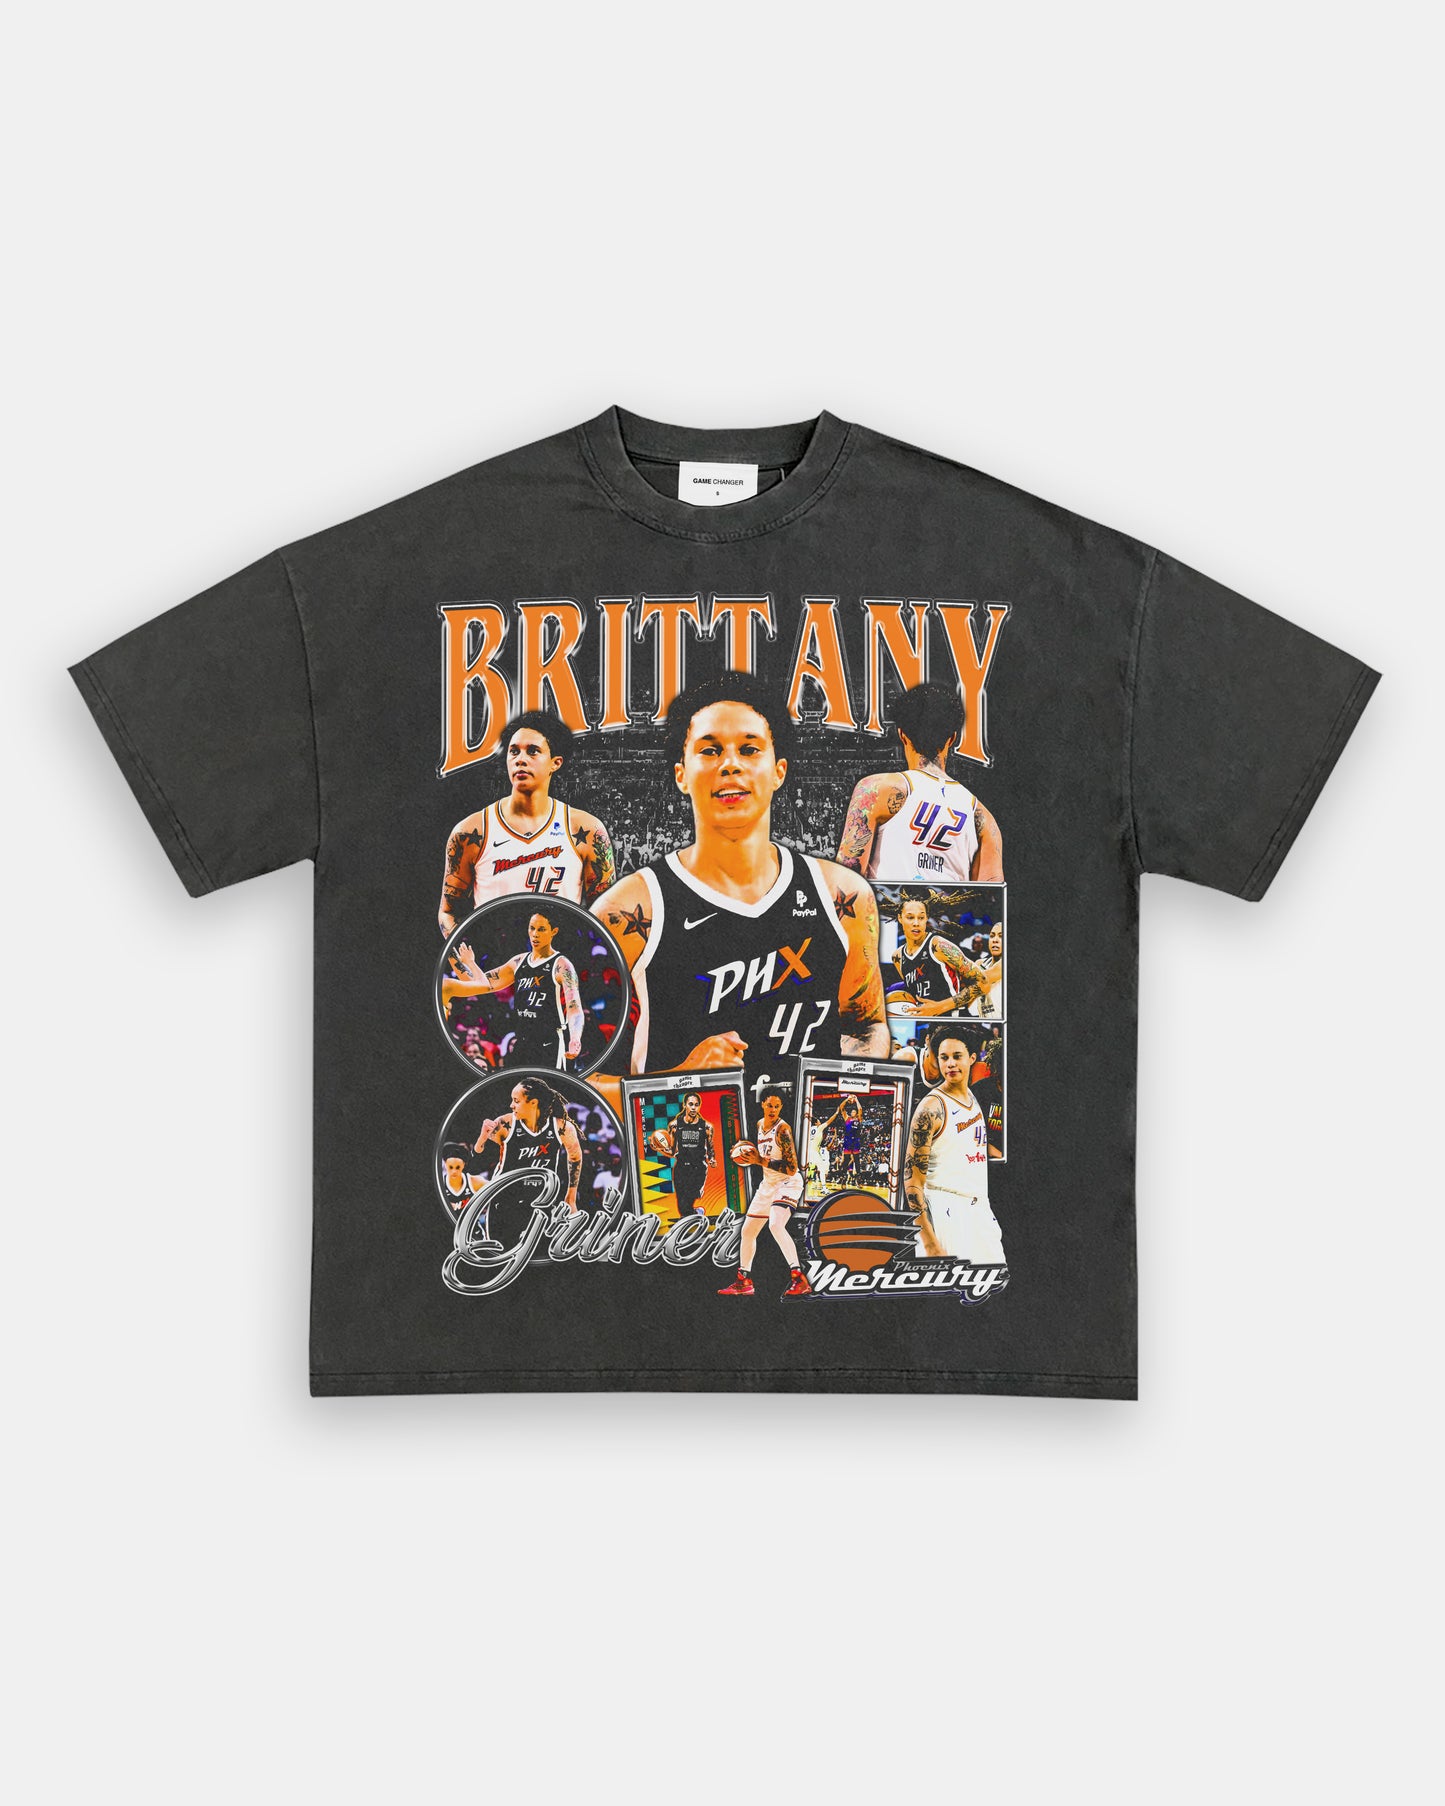 BRITTANY GRINER TEE